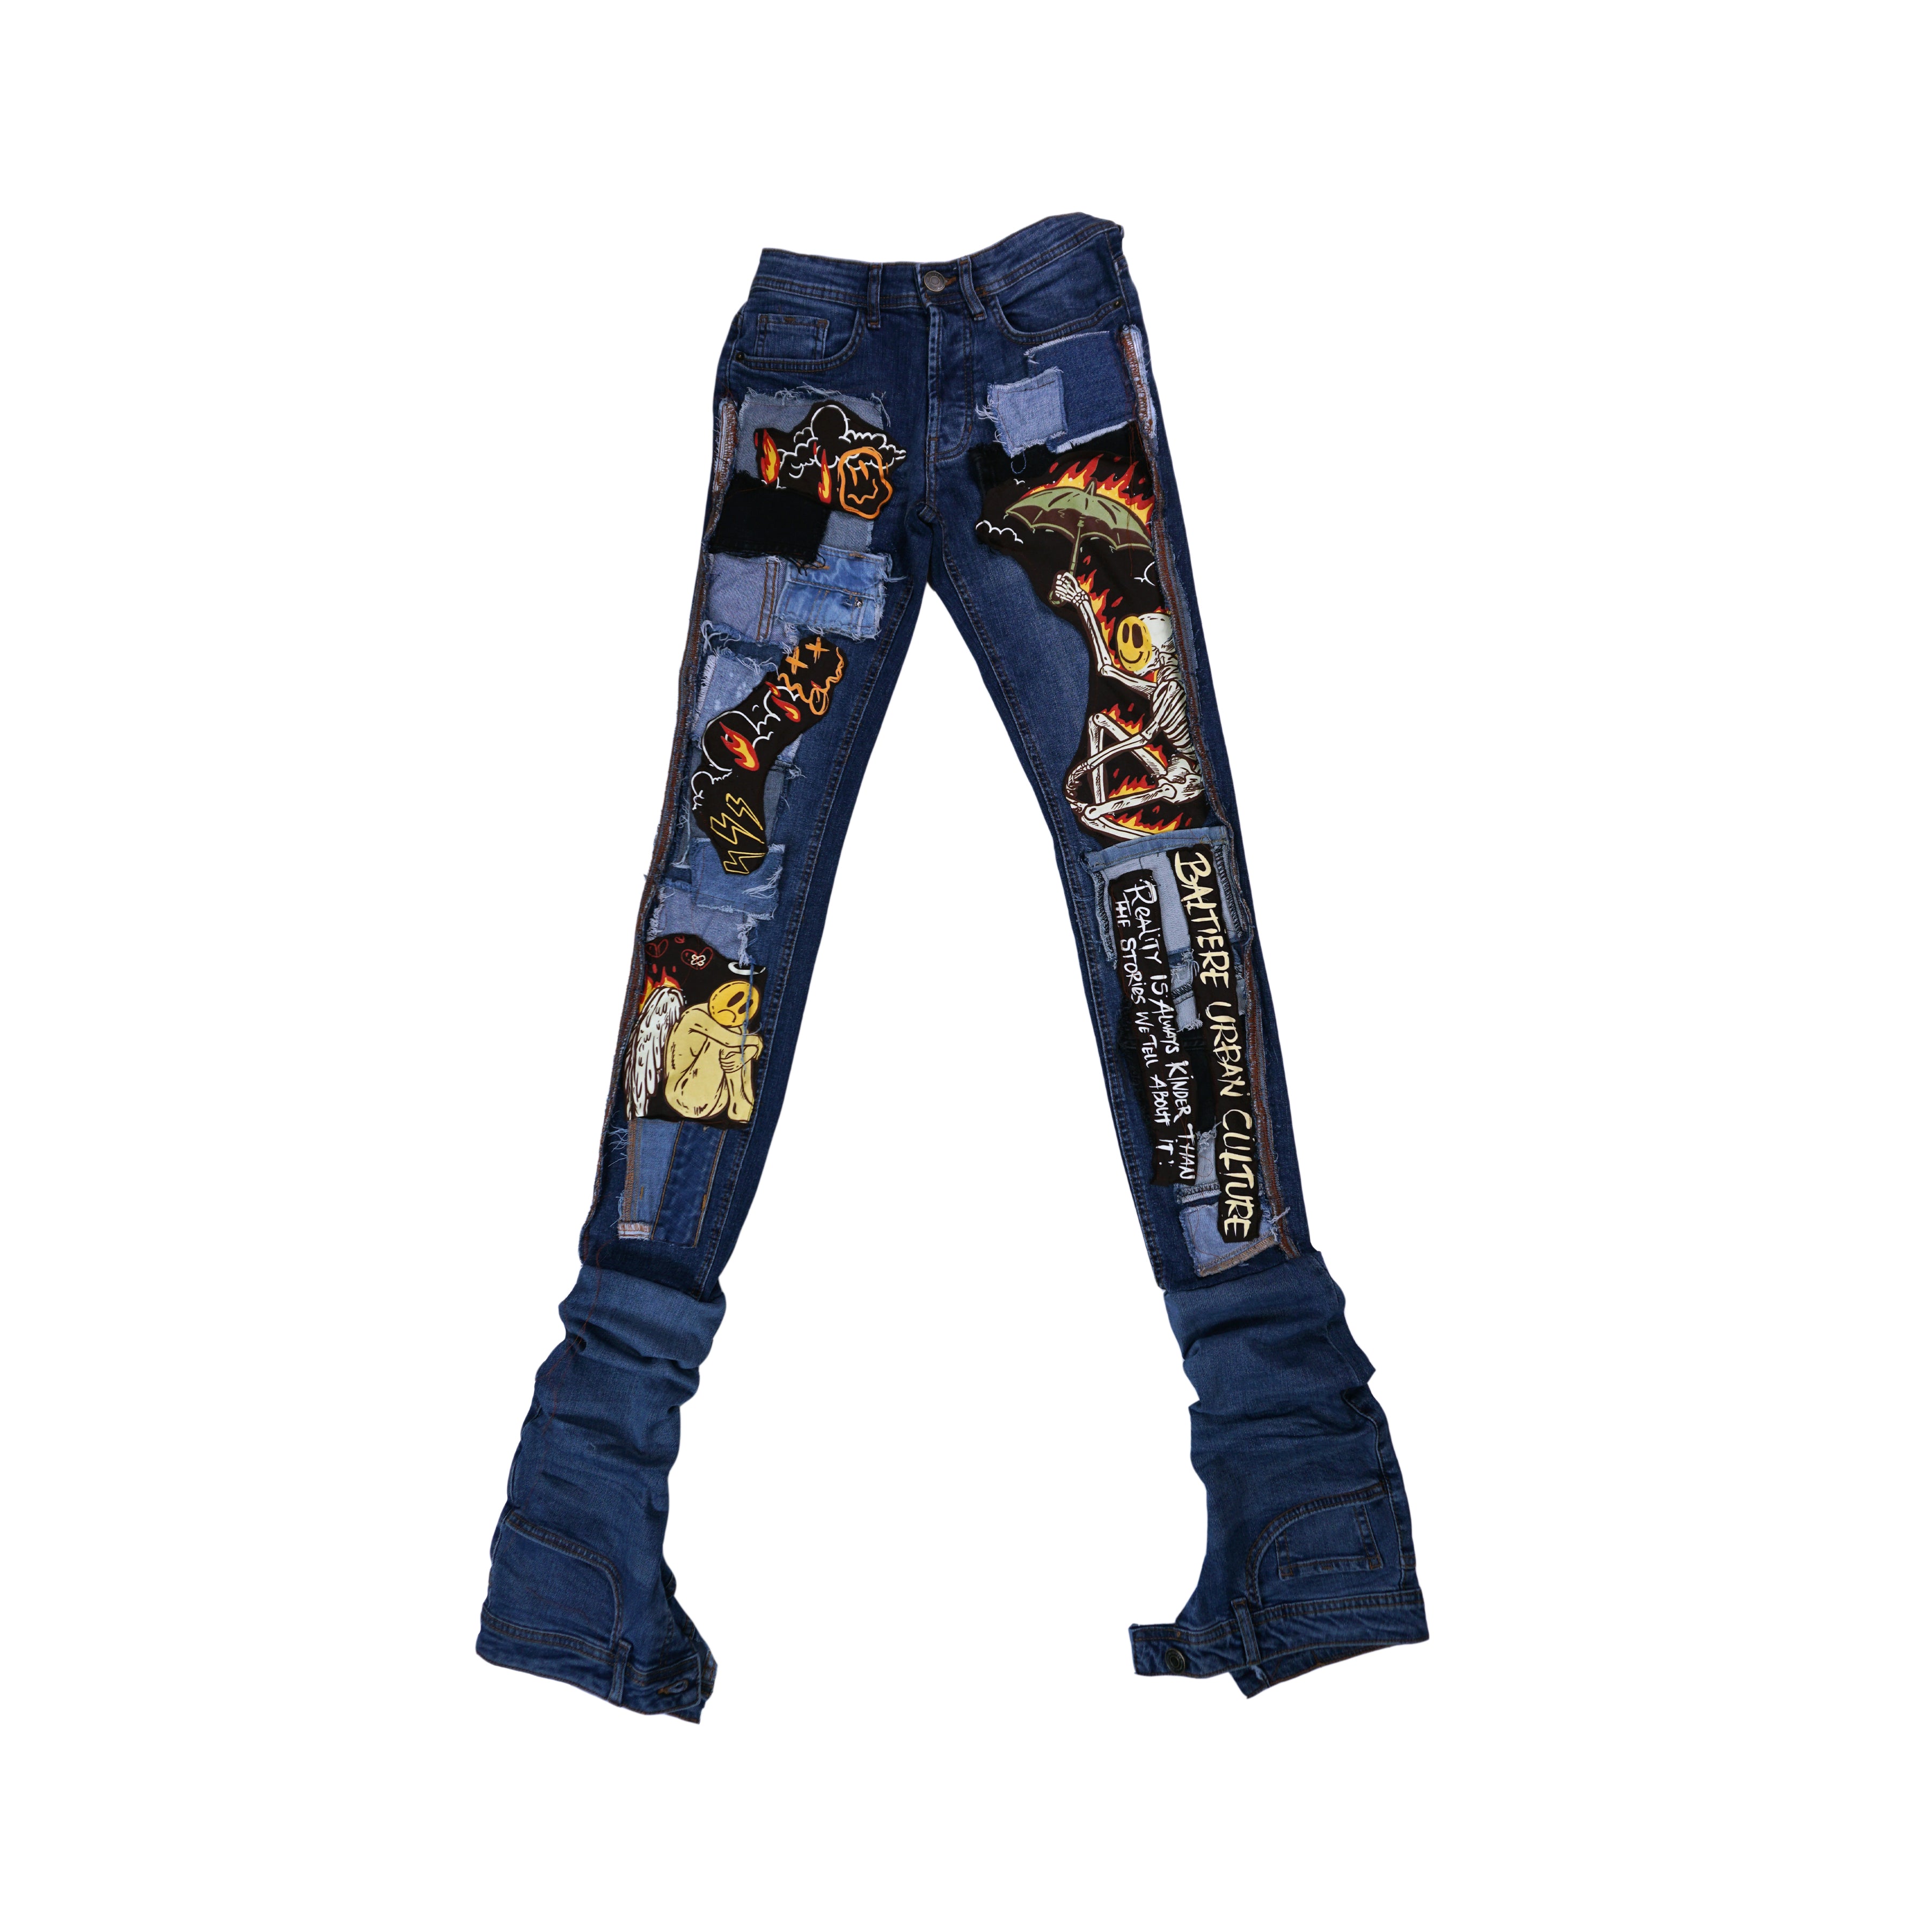 Chrome Hearts CHROME HEARTS BLACK DAGGER CUSTOM PATCH JEANS SPECIAL ORDER,  Chrome Hearts Patches - valleyresorts.co.uk